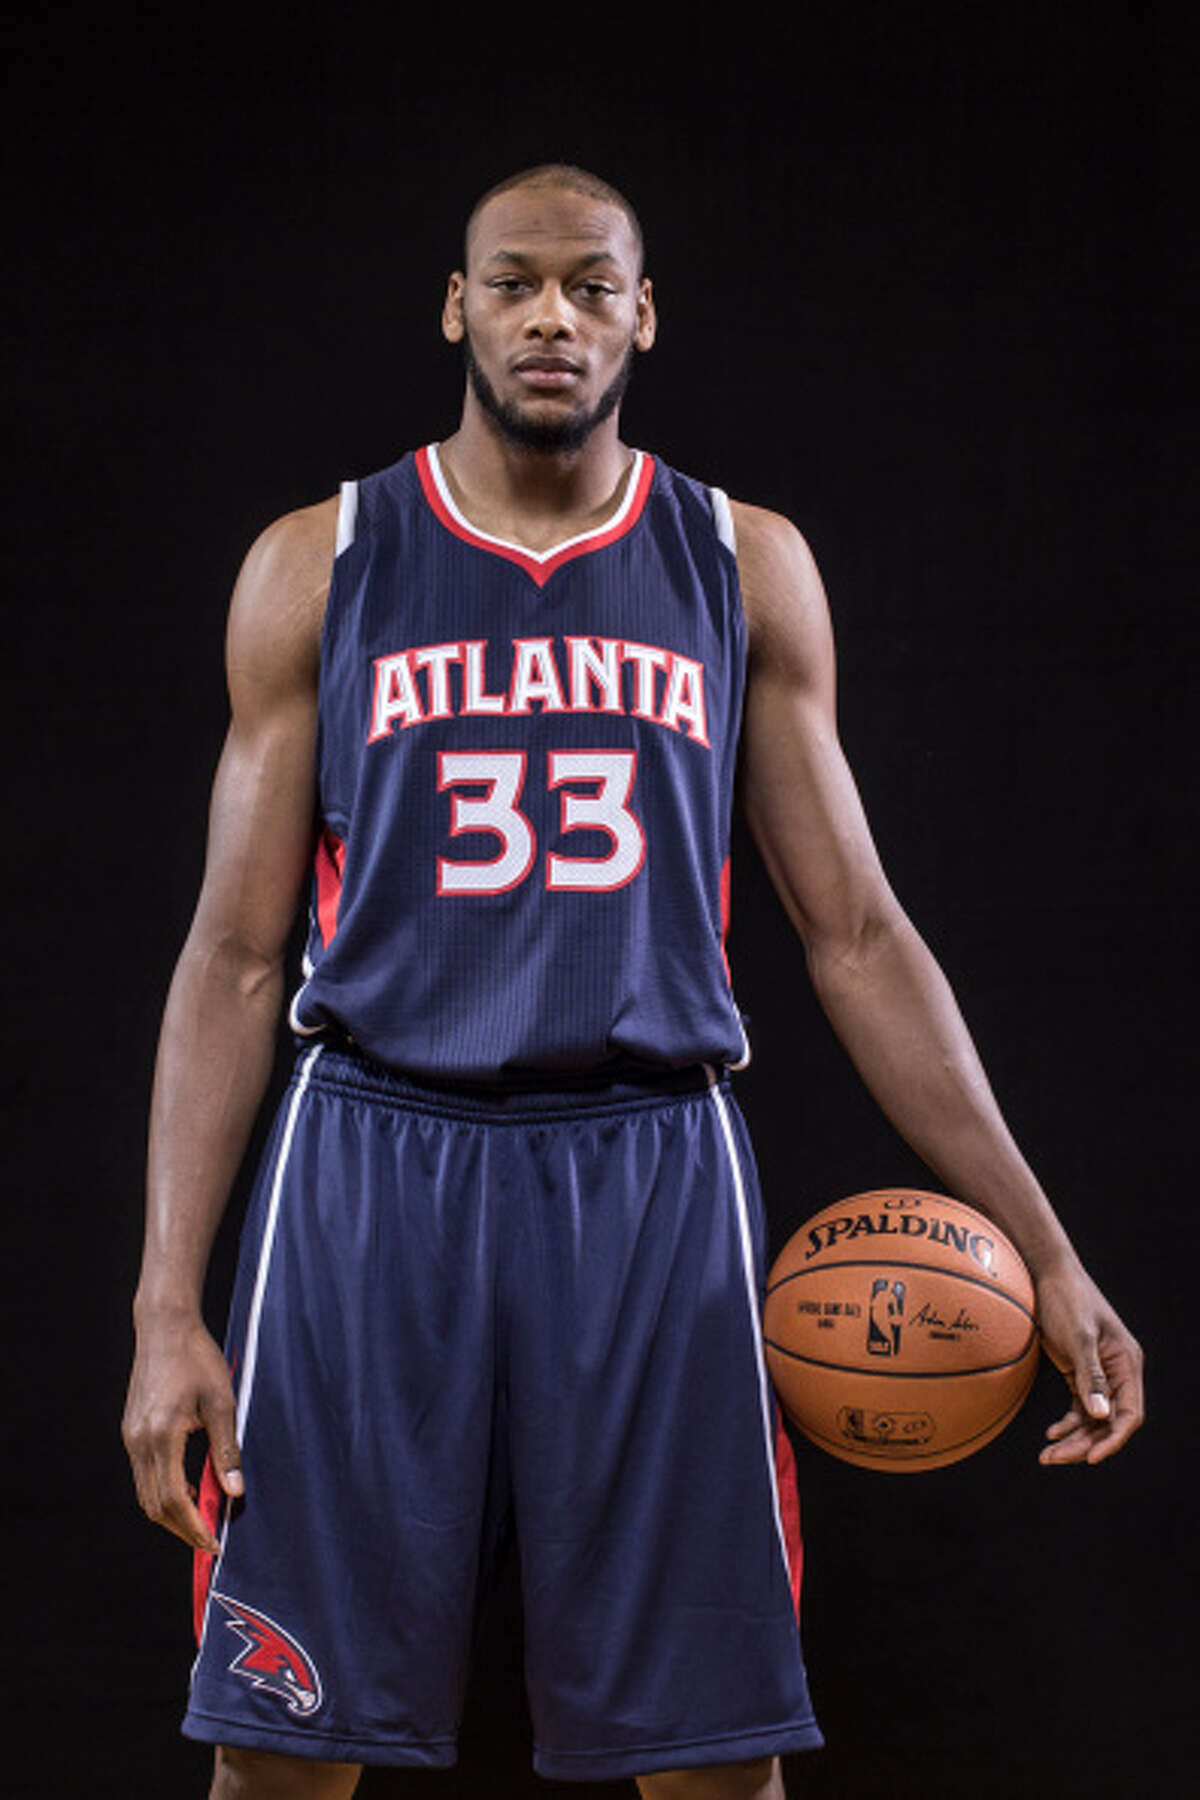 Adreian Payne of the Atlanta Hawks poses for a portrait during the 2014 NBA rookie photo shoot at MSG Training Center on August 3, 2014 in Tarrytown, New York.